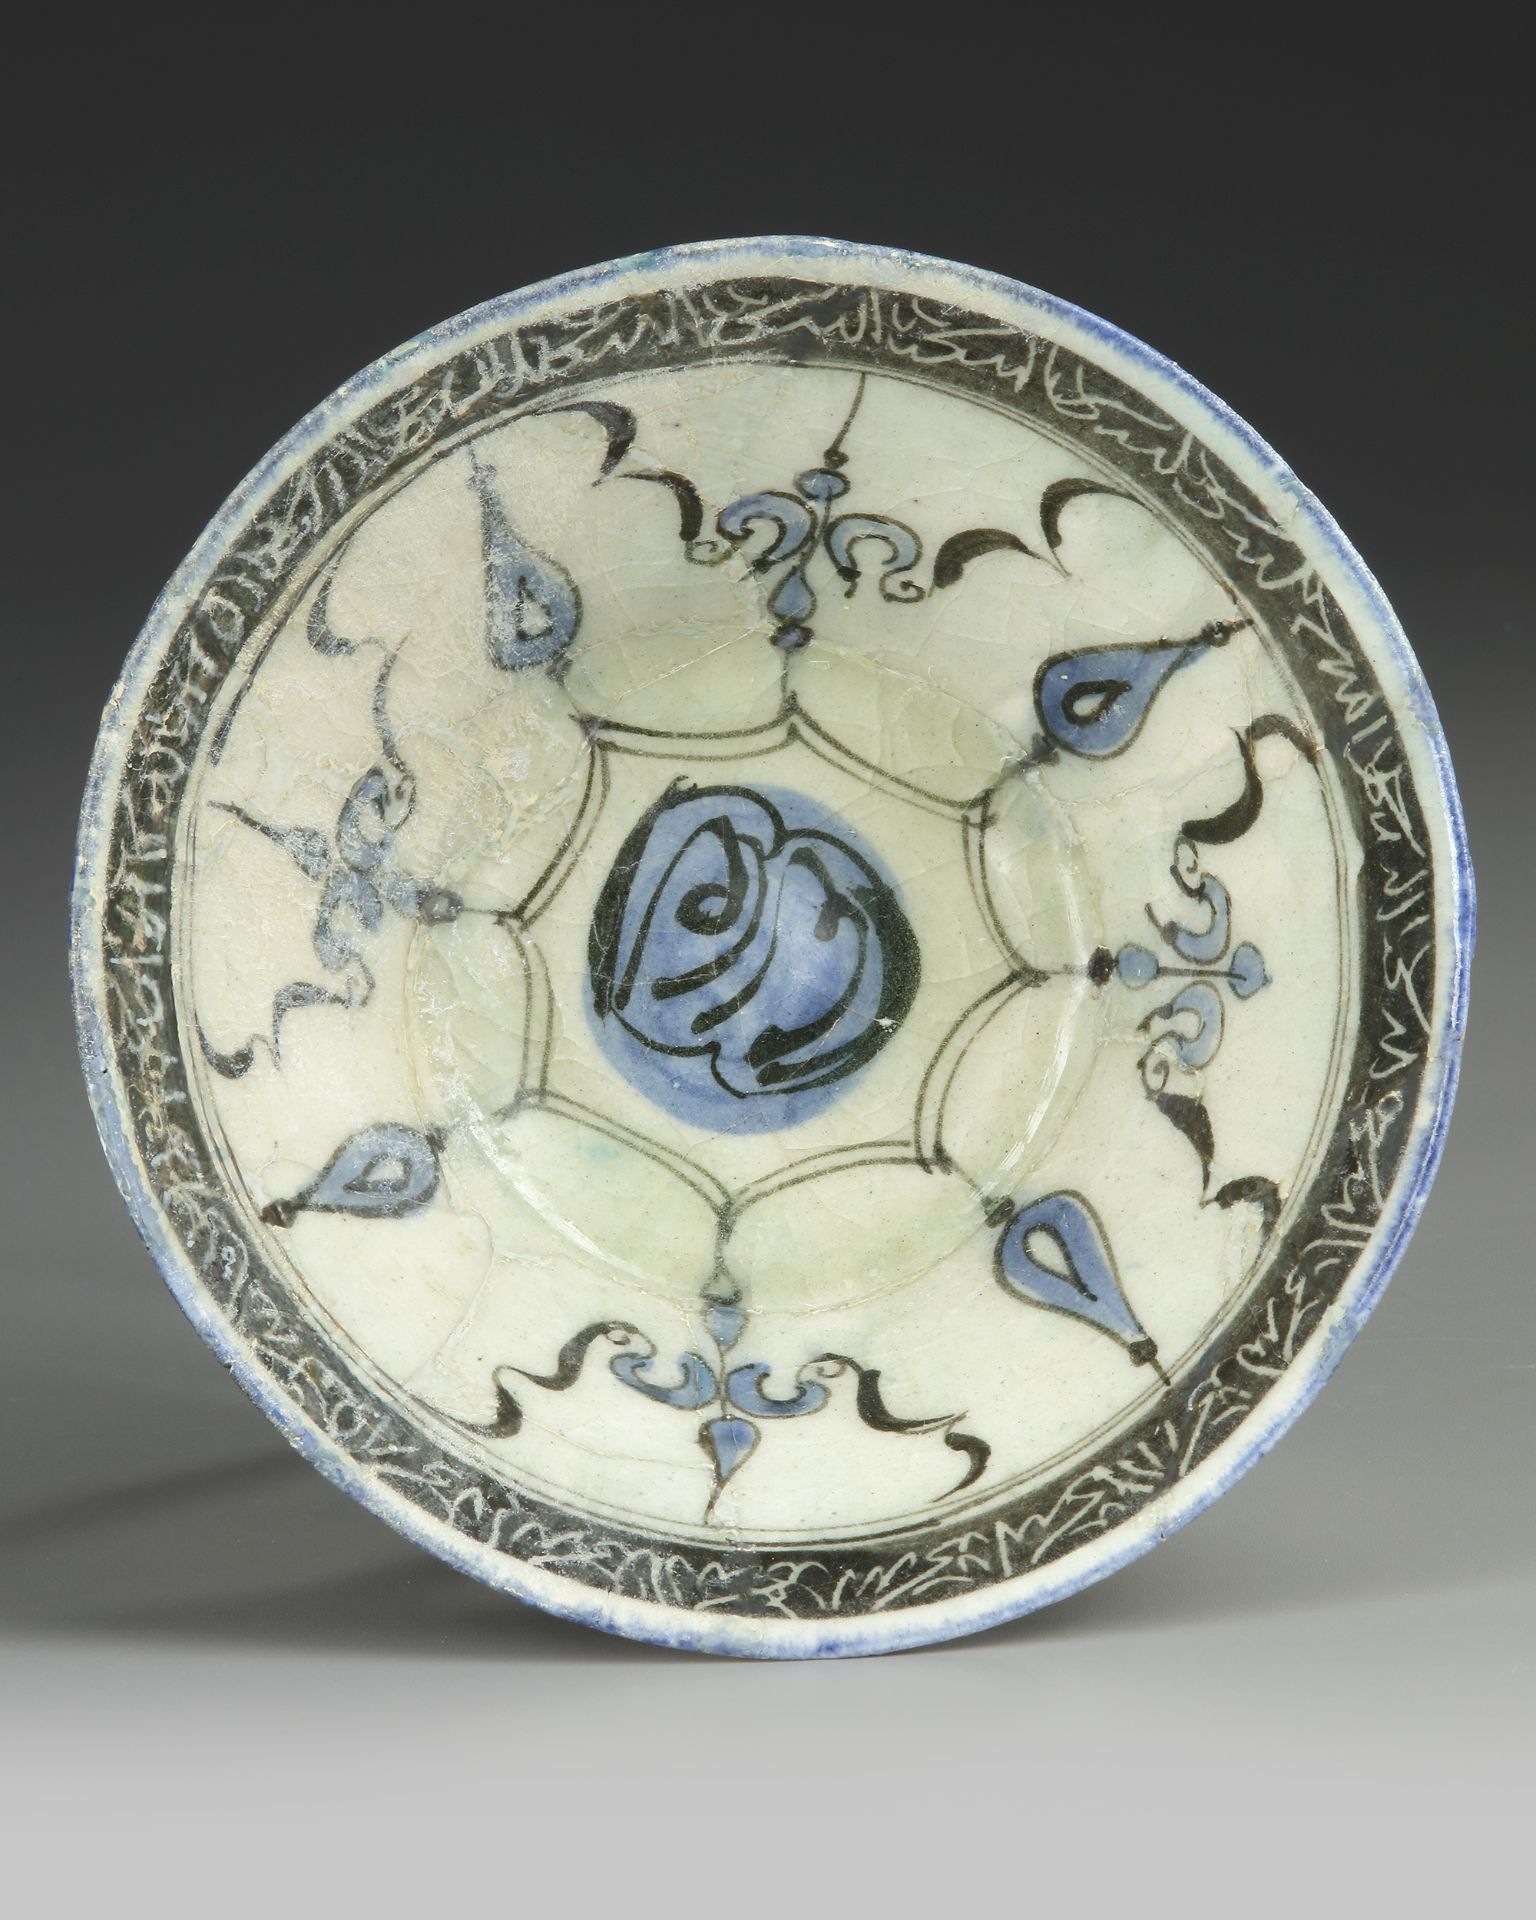 A KASHAN POTTERY BOWL, PERSIA, 13TH CENTURY